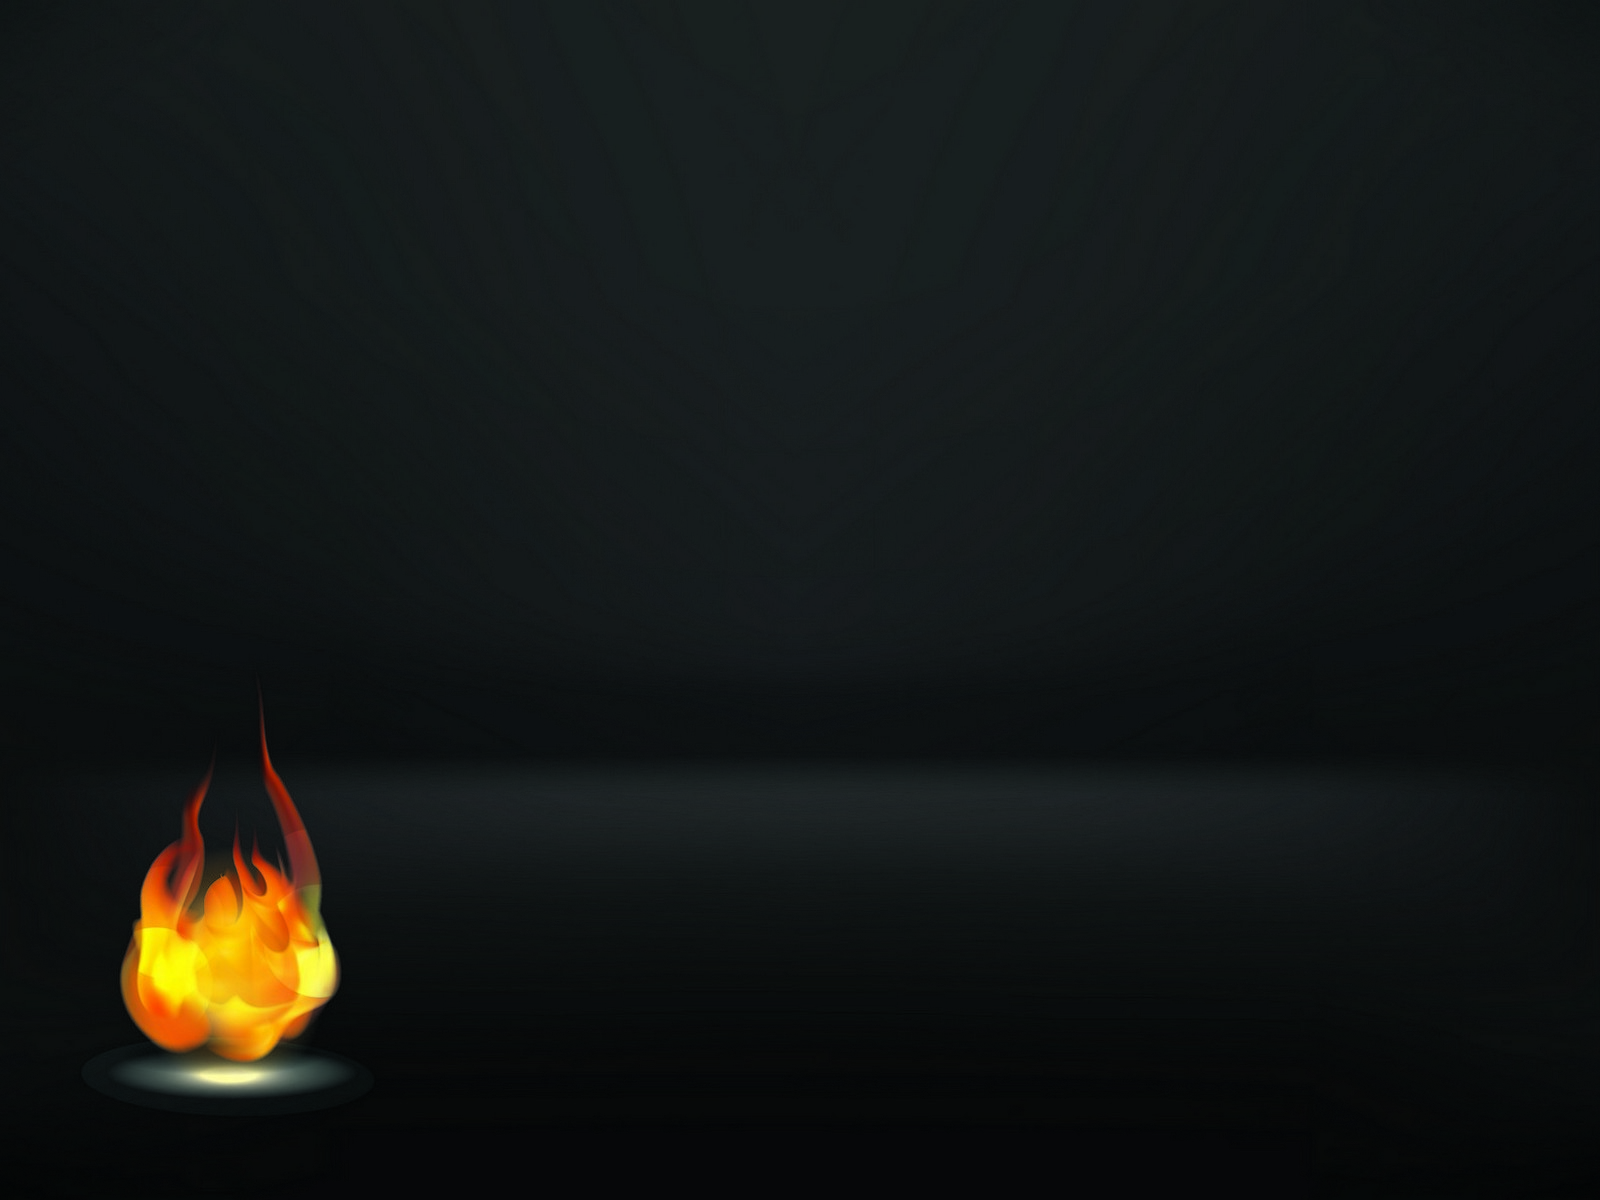 A Fire Flame Background PPT Backgrounds